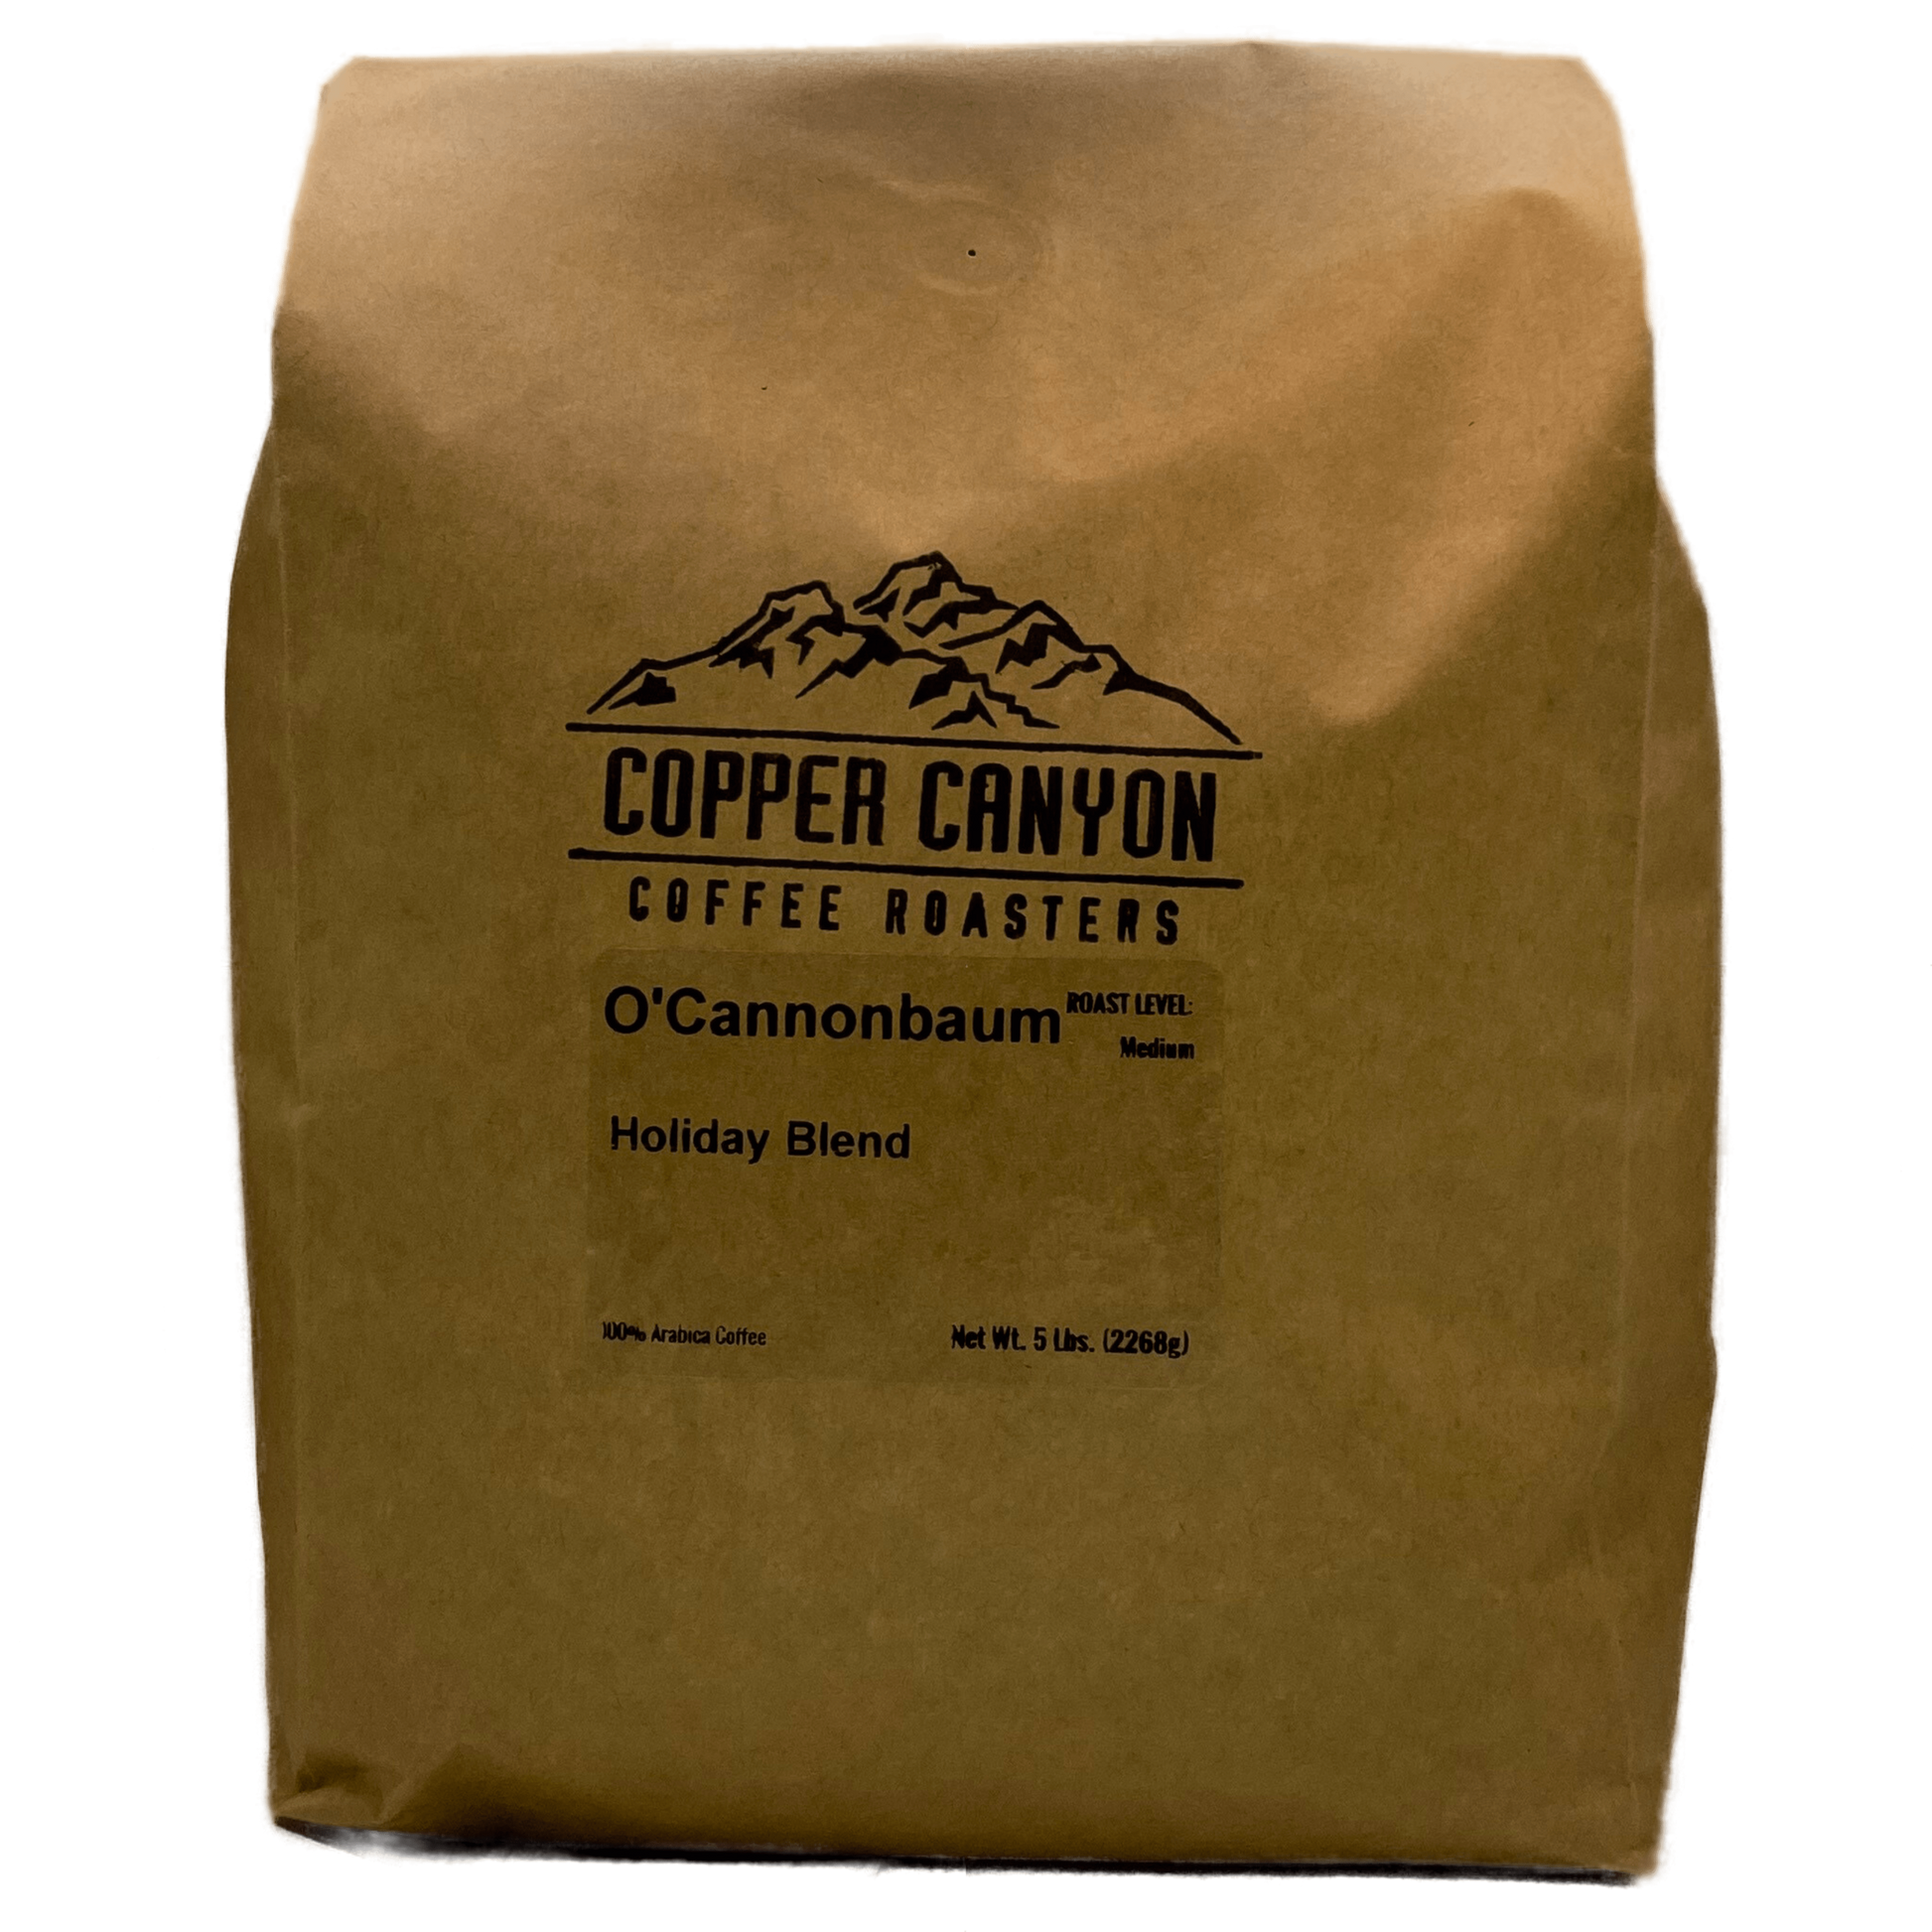 5 pound bag of O'Cannon Baum Holiday Blend dark roast coffee by Copper Canyon